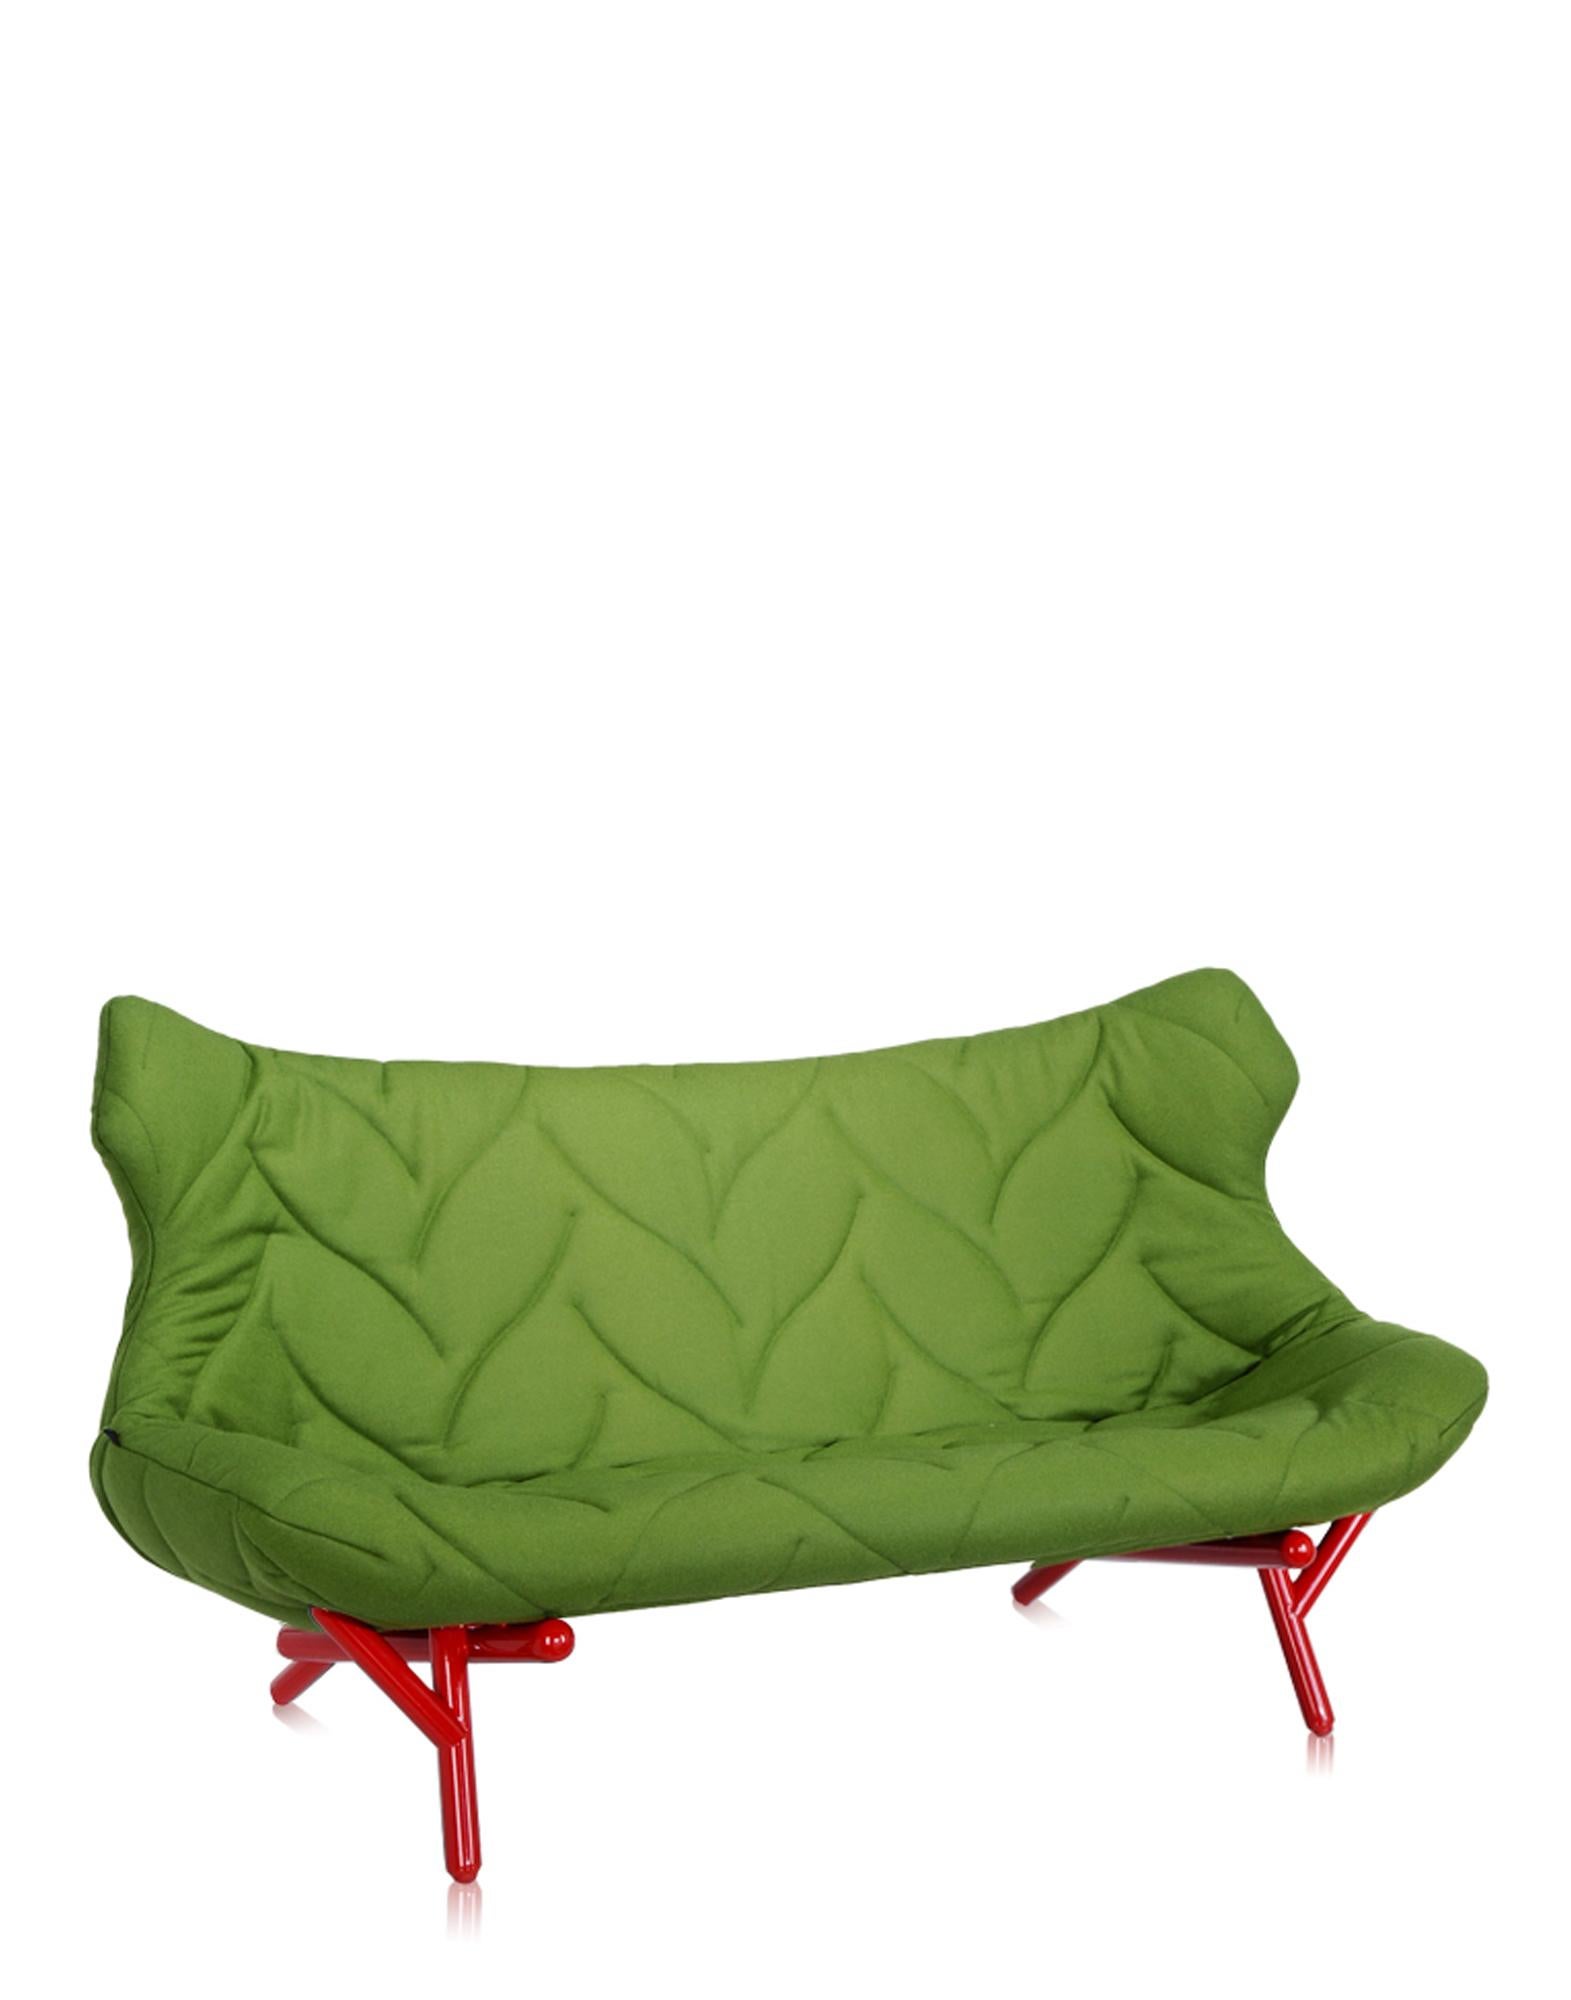 Foliage collection is a family of soft chairs. The key players are a two-seater sofa and an armchair, that seem to have grown 